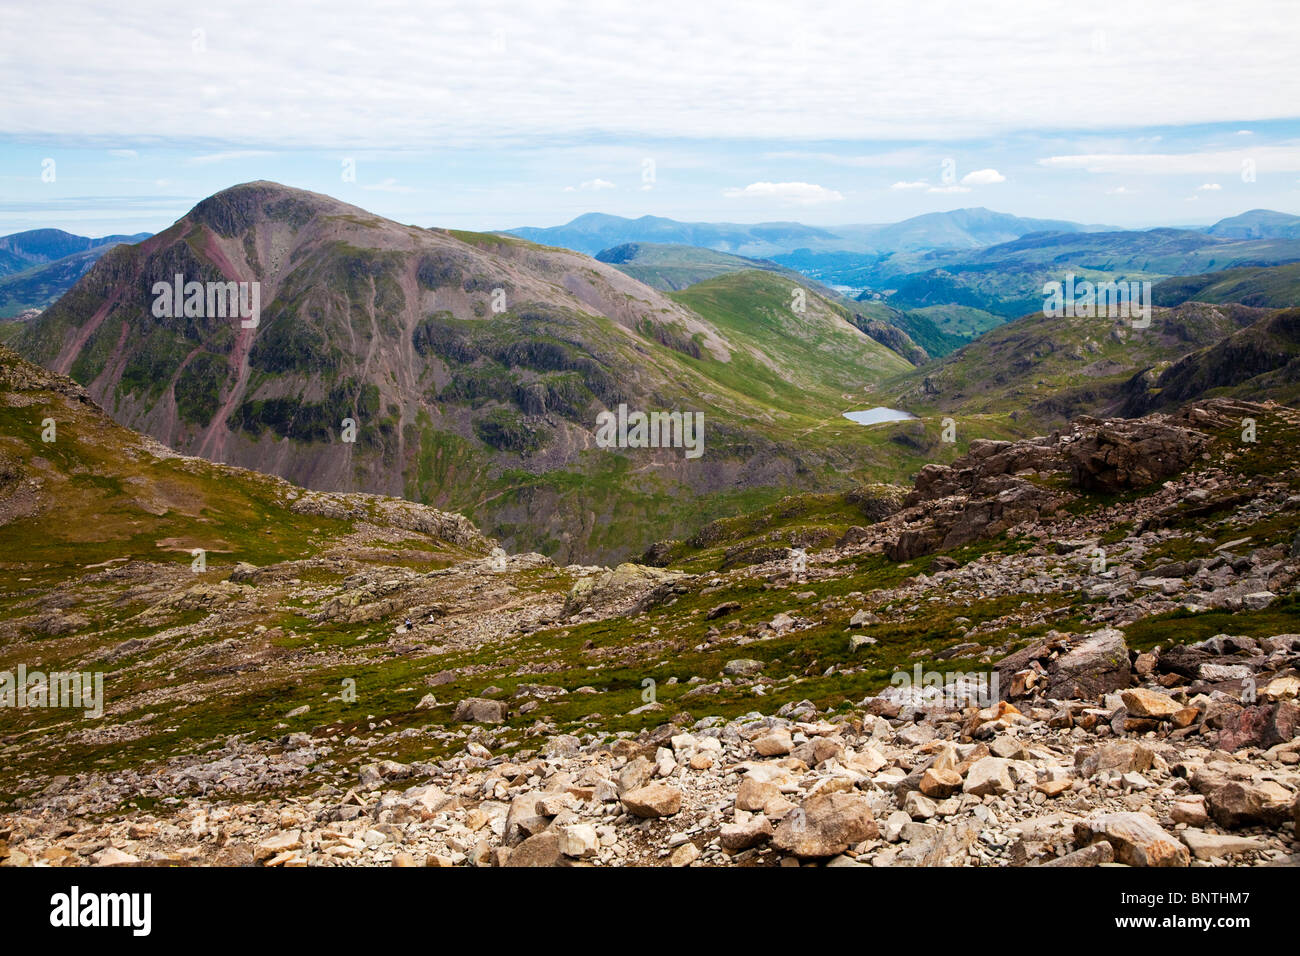 View from Scafell Pike, looking north-west with Great Gable in foreground, Styhead Tarn below and Derwent Water in far distance. Stock Photo